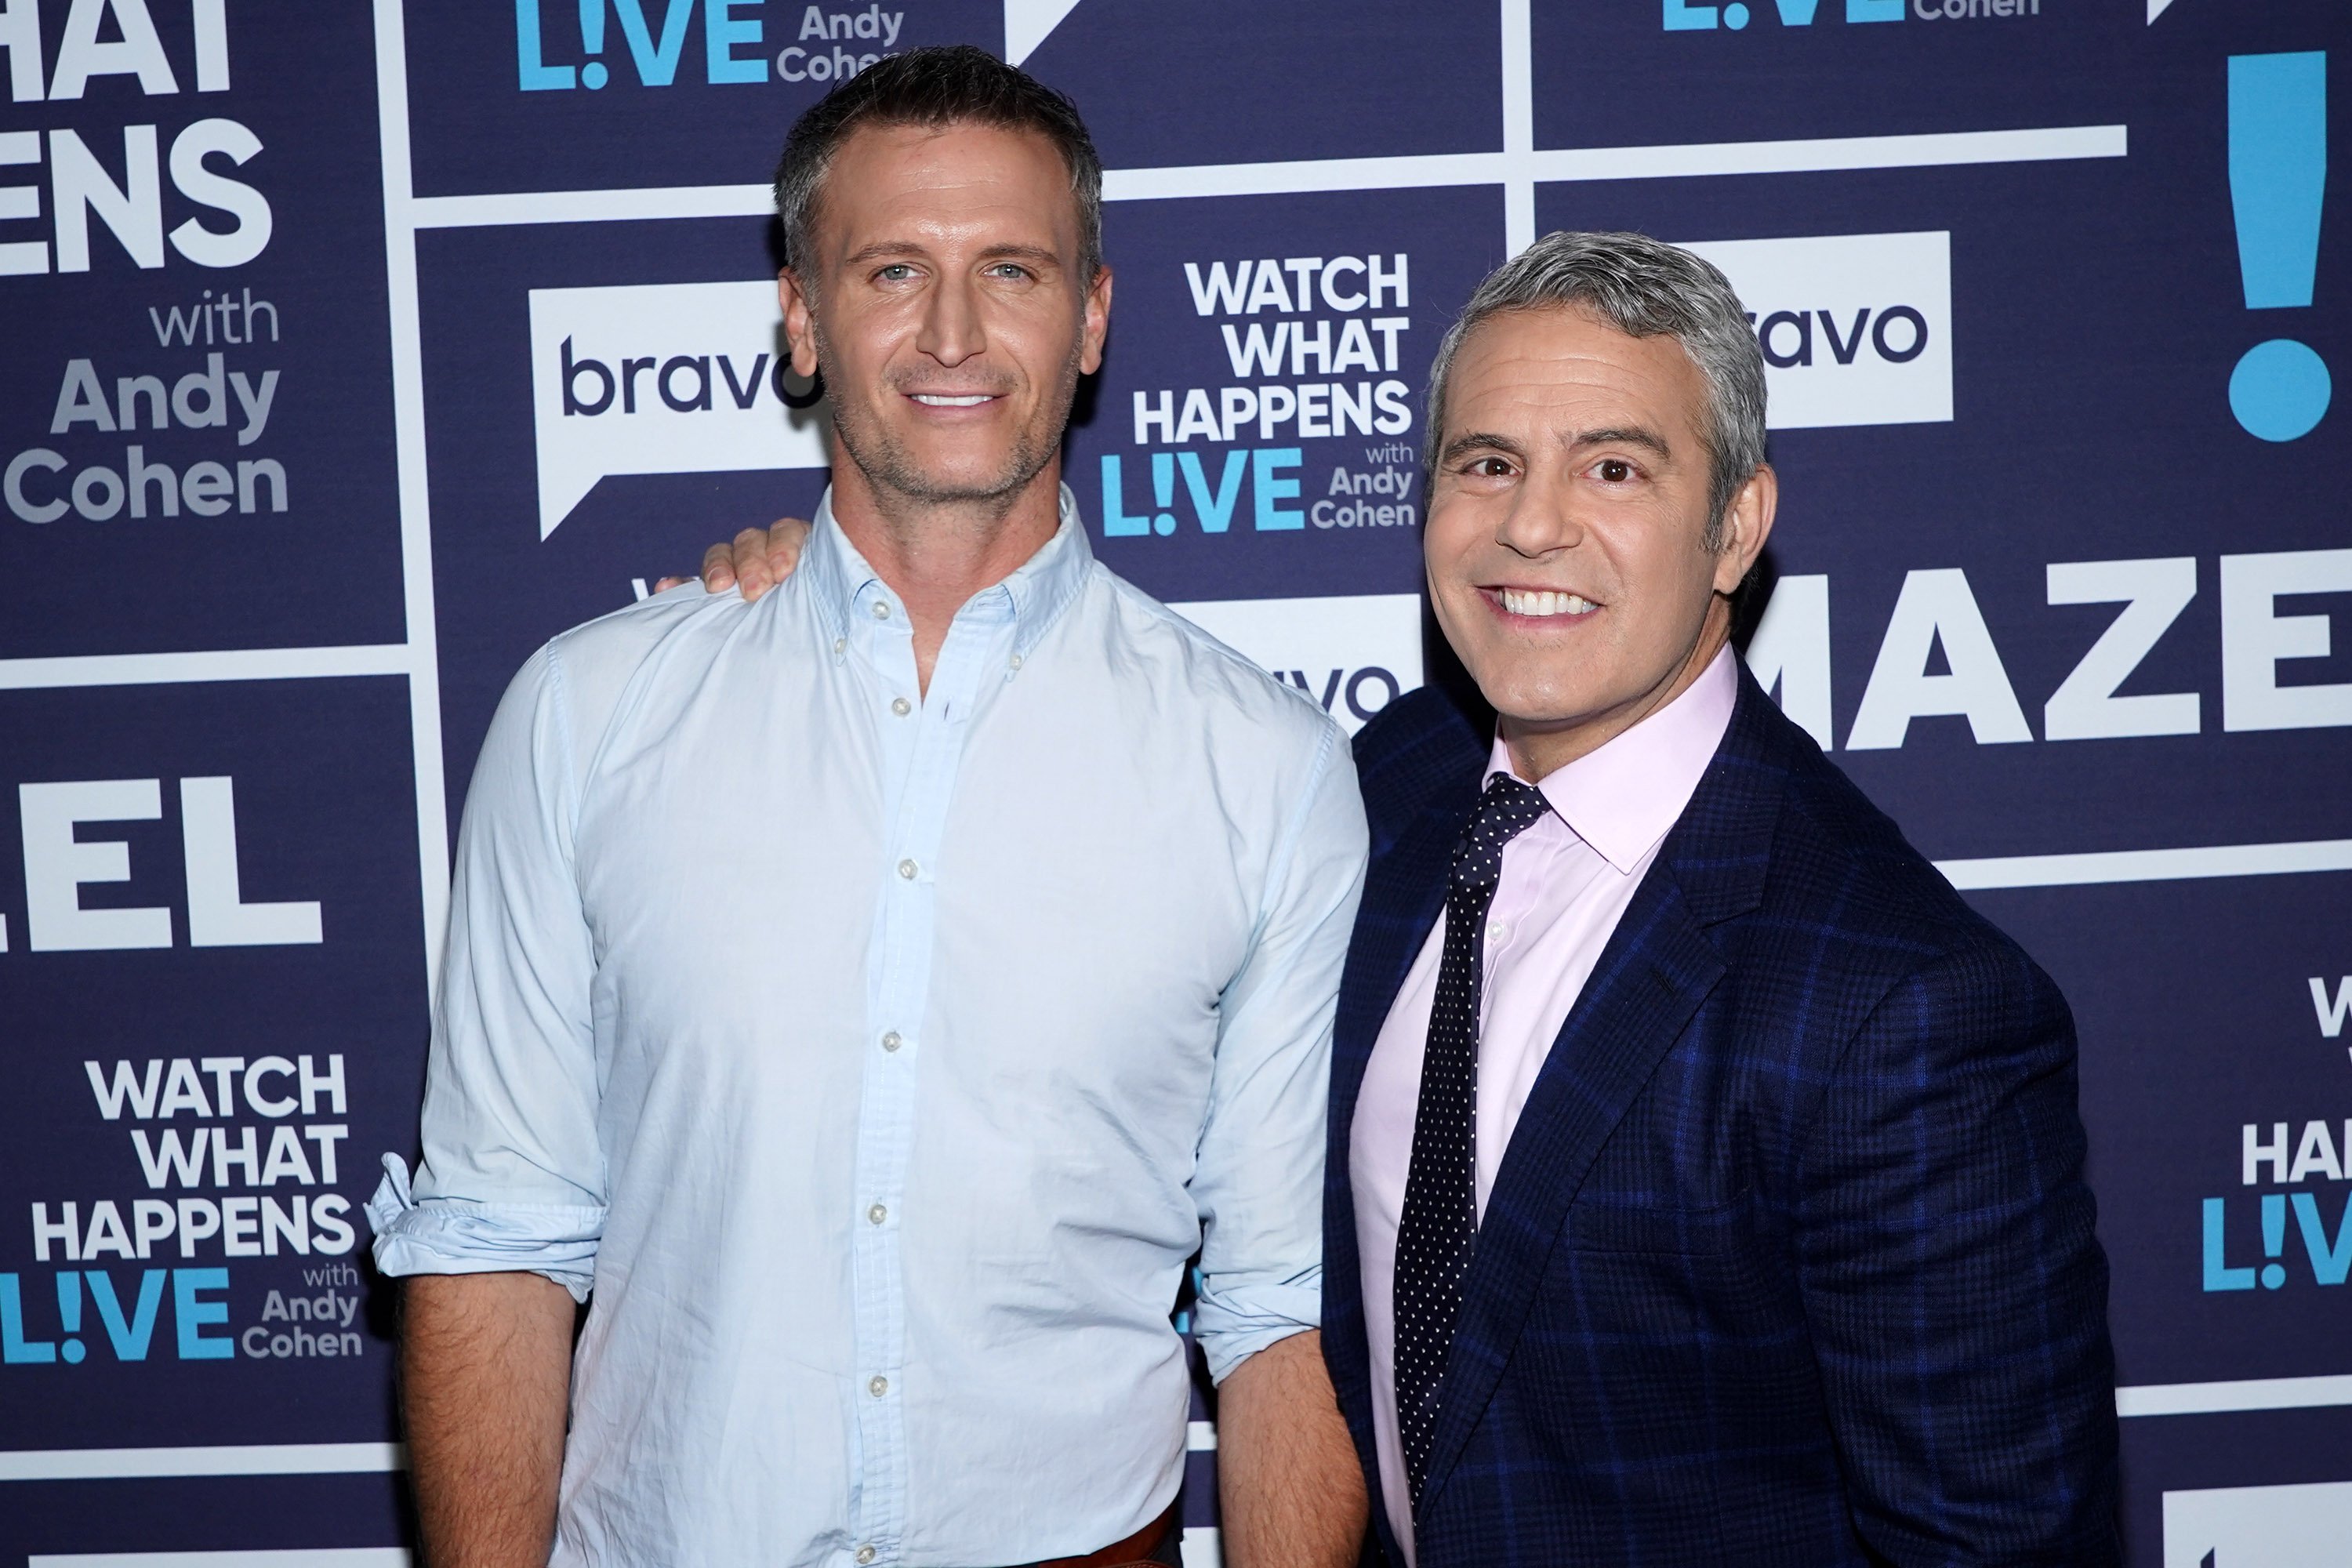 Andy Cohen and John Hill on the set of his show "Watch What Happens Live With Andy Cohen" on November 2, 2021 | Source: Getty Images